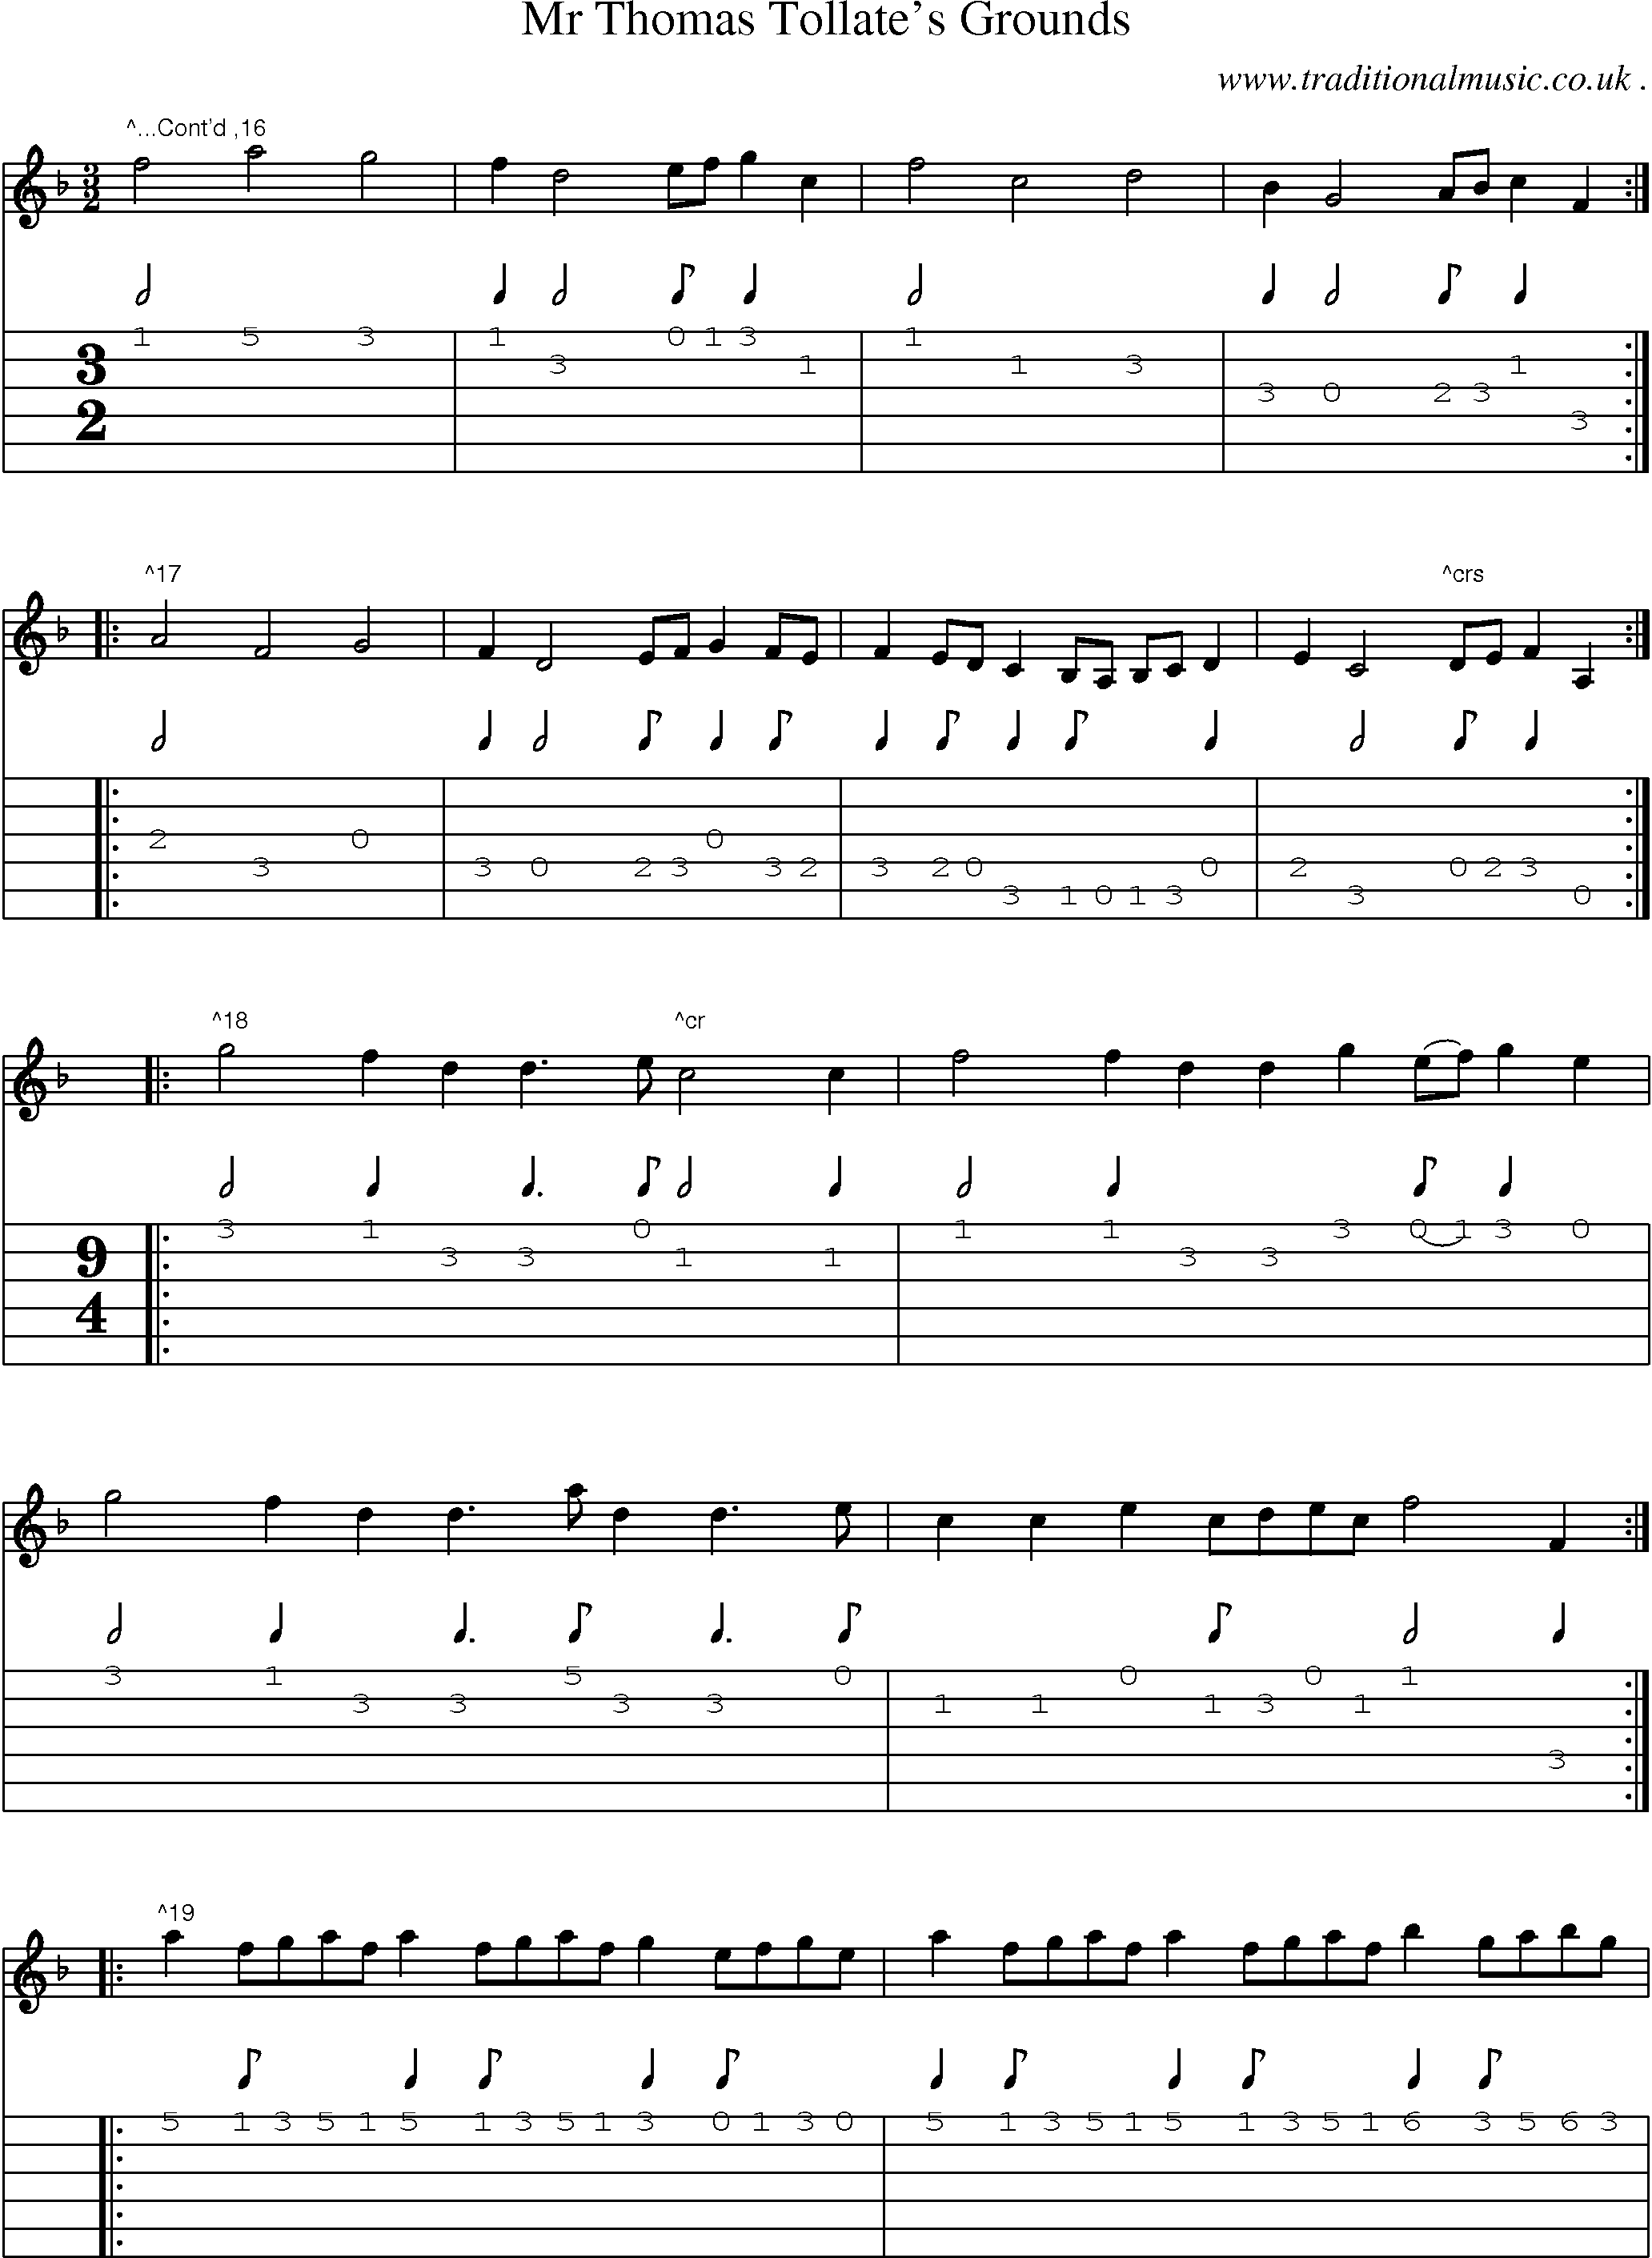 Sheet-Music and Guitar Tabs for Mr Thomas Tollates Grounds